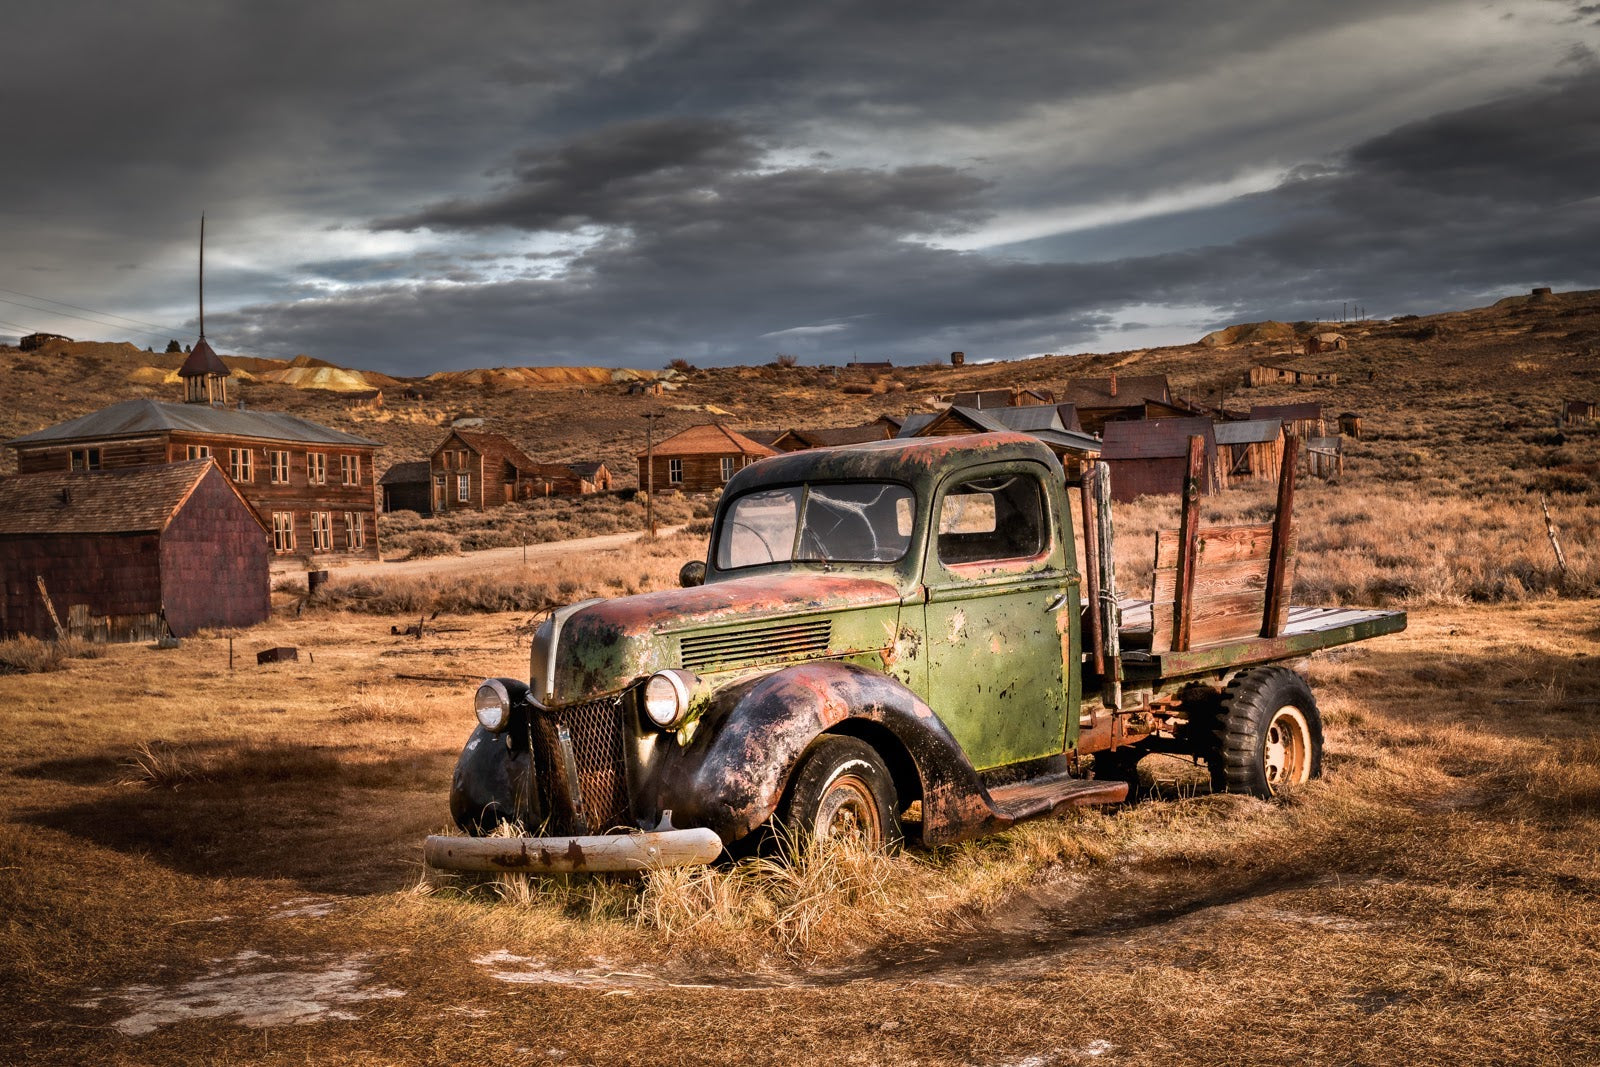 “Once Upon A Time” - Bodie, CA